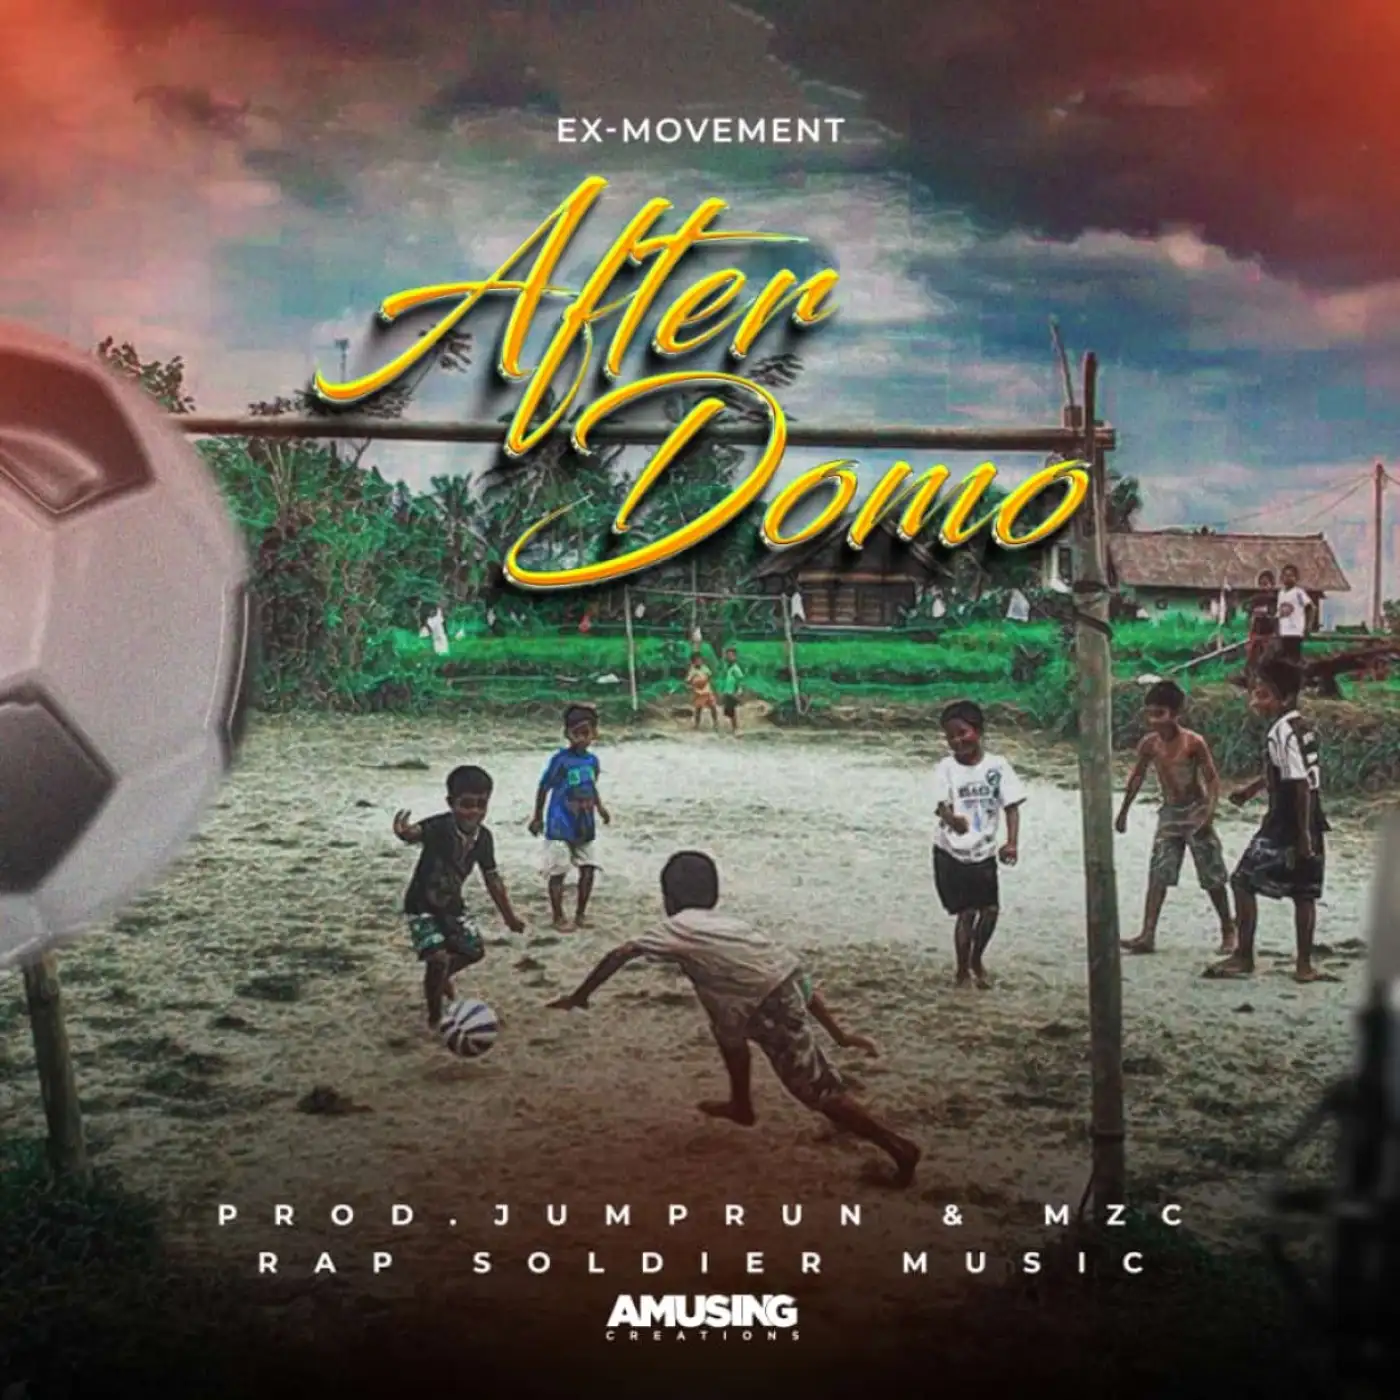 ex-movement-after-domo-prod-jumprun-mzc-mp3-download-mp3 download